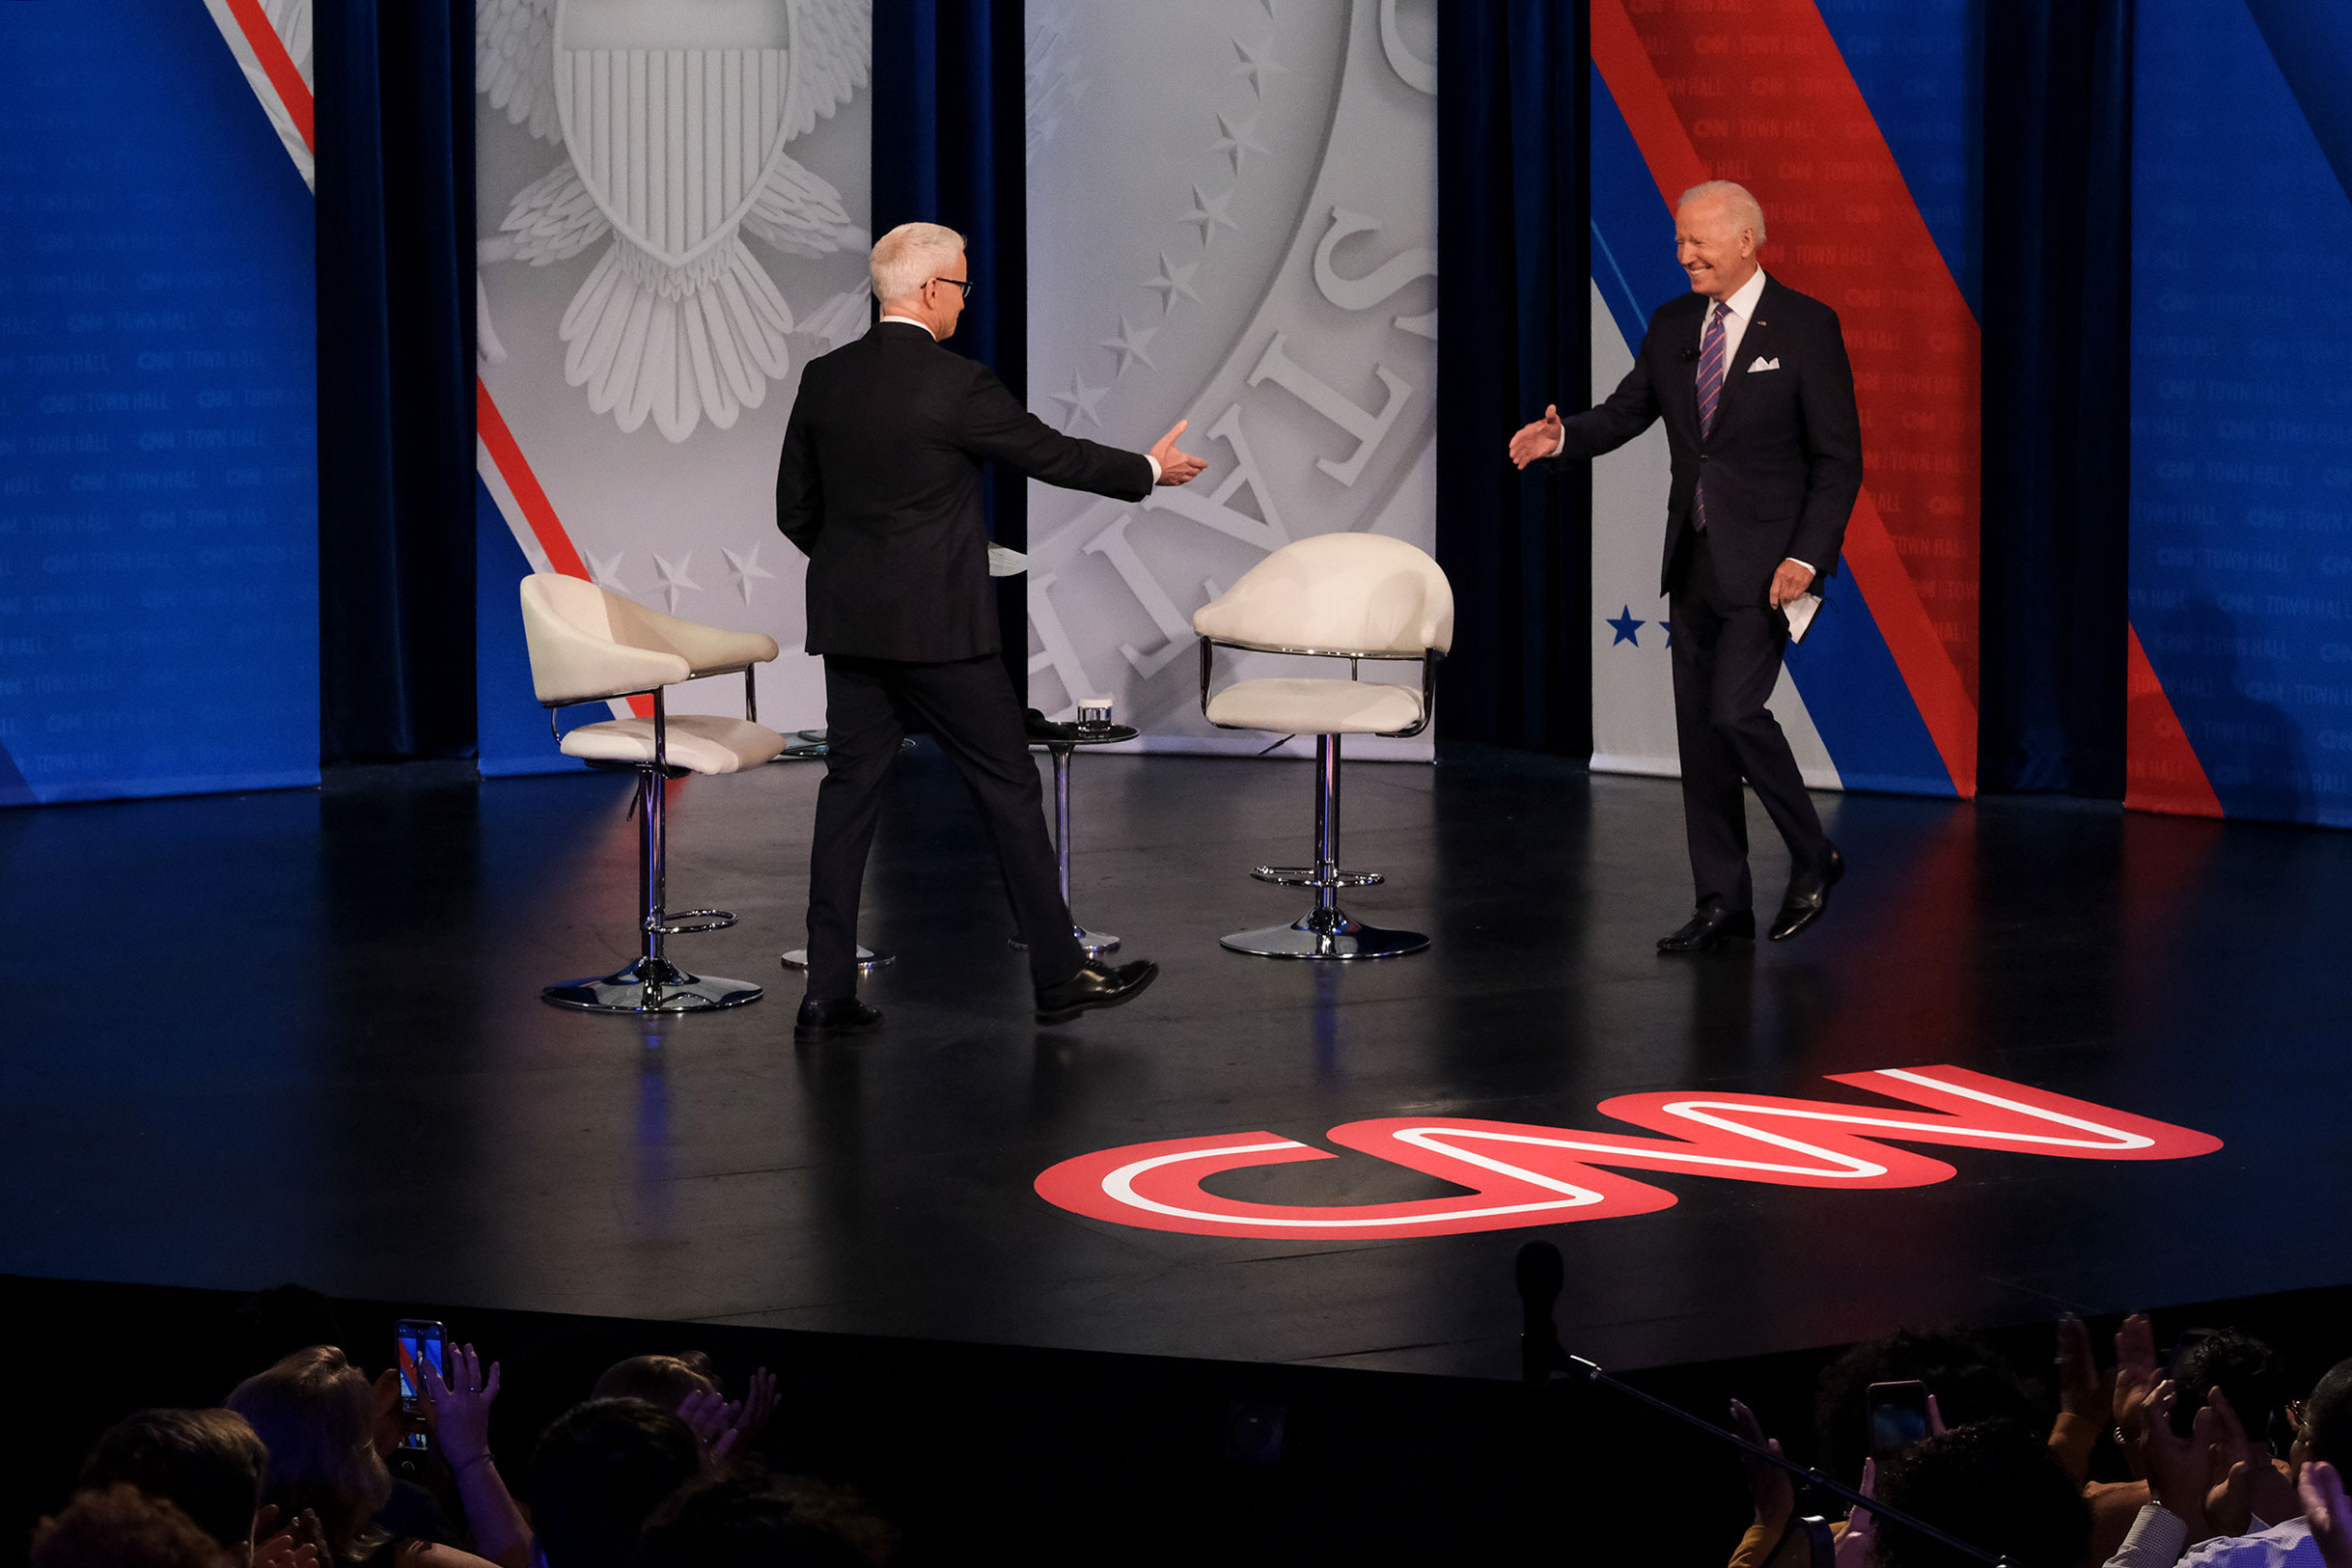 President Joe Biden goes to shake hands with CNN anchor and host Anderson Cooper at CNN's Presidential Town Hall in Baltimore, Maryland, on October 21.